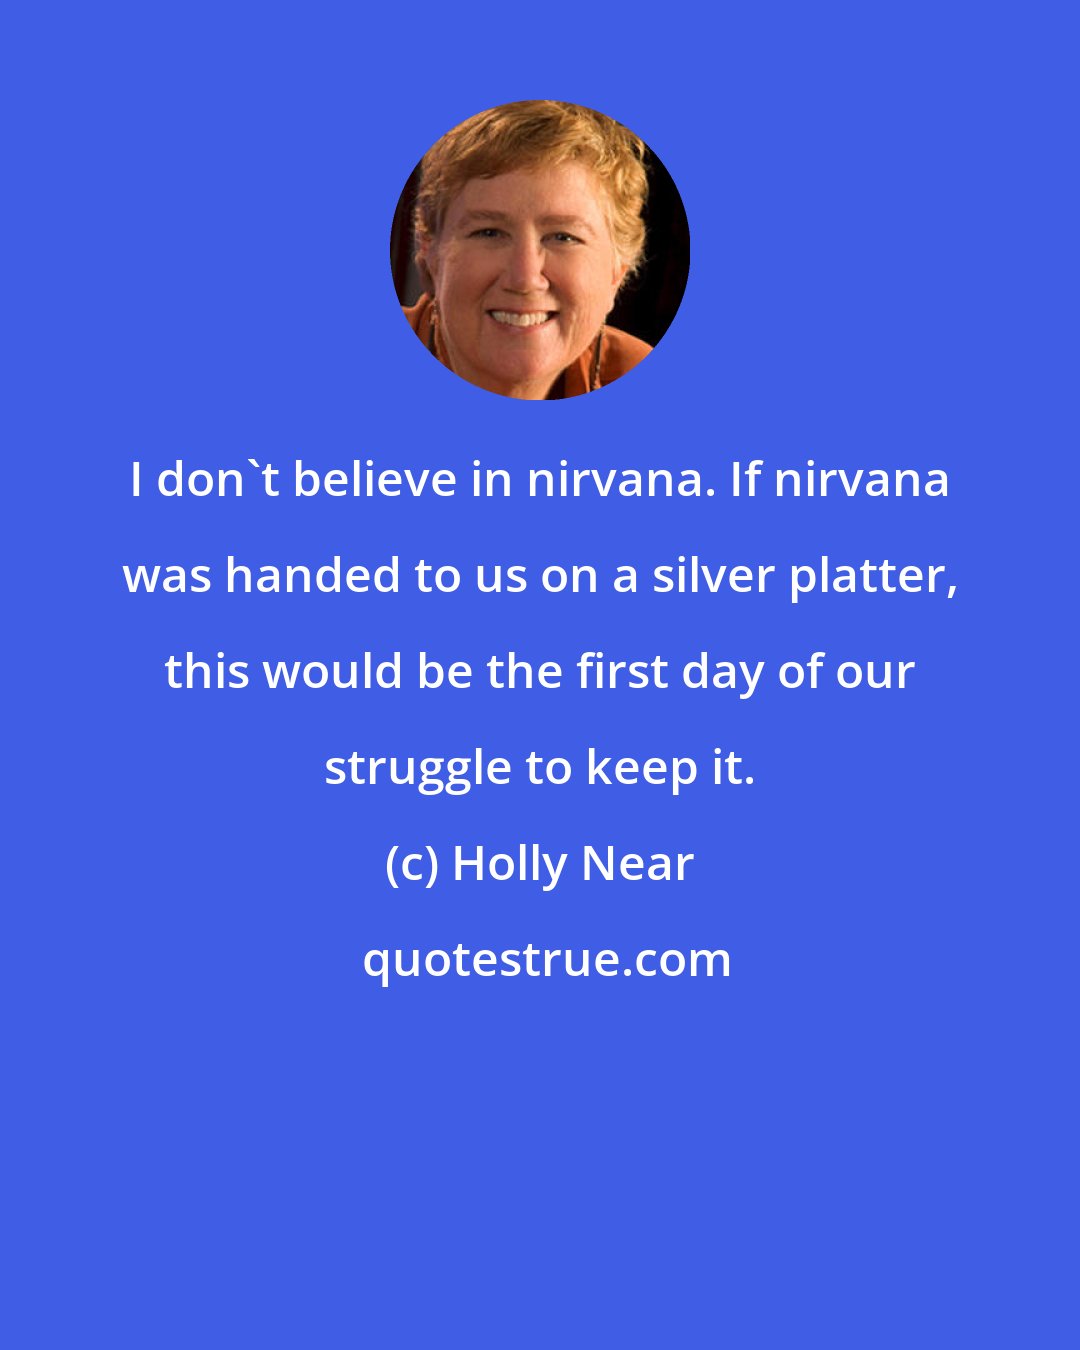 Holly Near: I don't believe in nirvana. If nirvana was handed to us on a silver platter, this would be the first day of our struggle to keep it.